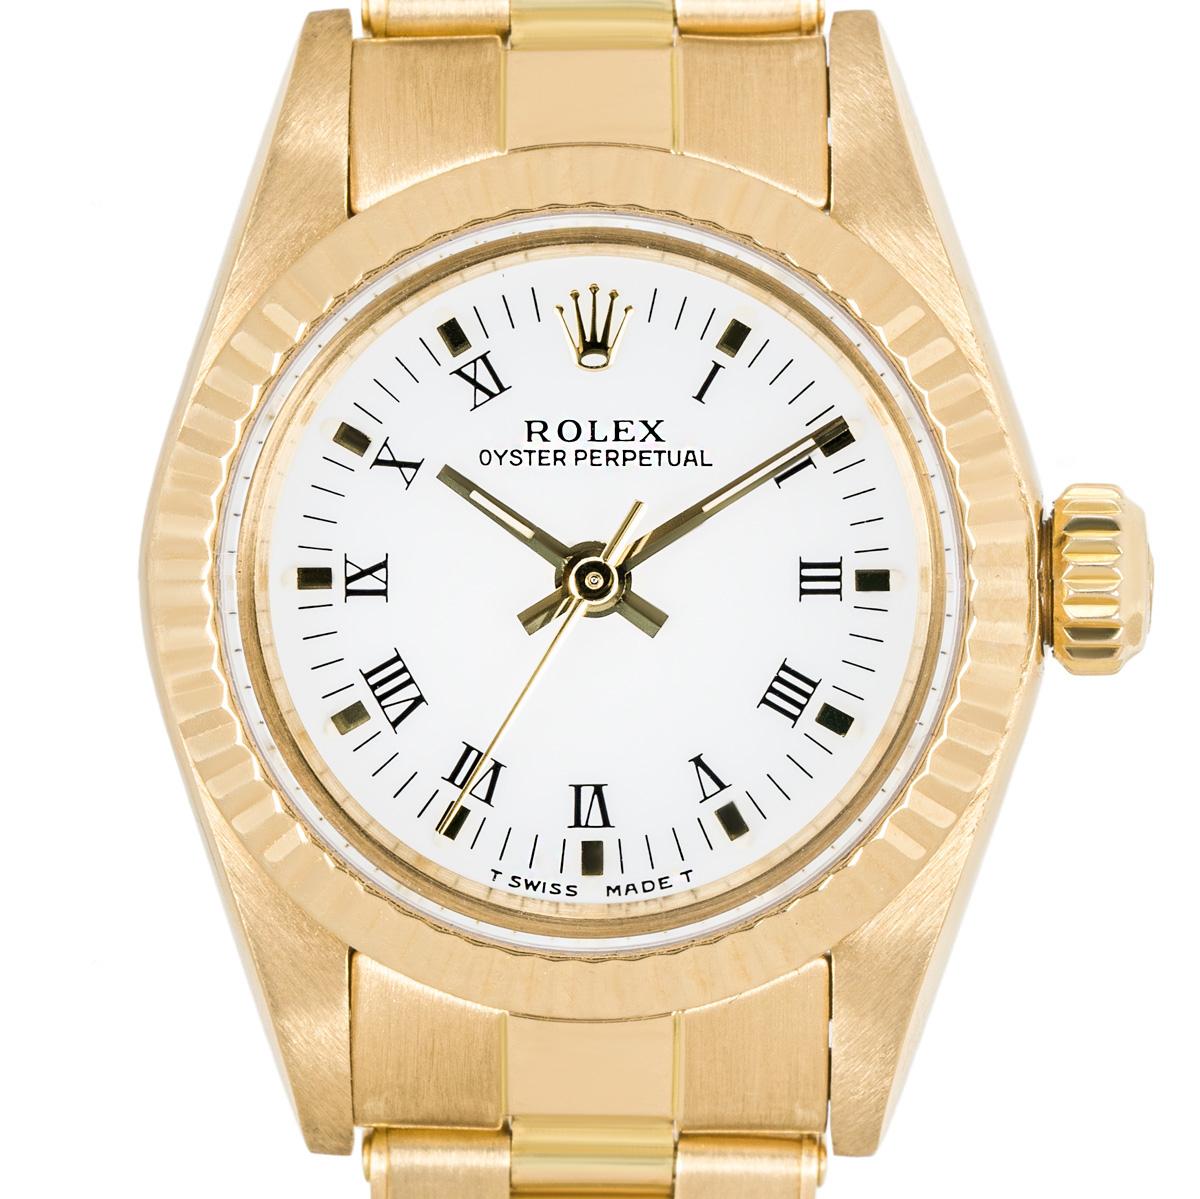 A Rolex 26mm ladies Oyster Perpetual in yellow gold. Featuring a white dial with roman numerals and a yellow gold fluted bezel. Fitted with a sapphire crystal and powered by a self-winding automatic movement. The watch is equipped with a yellow gold